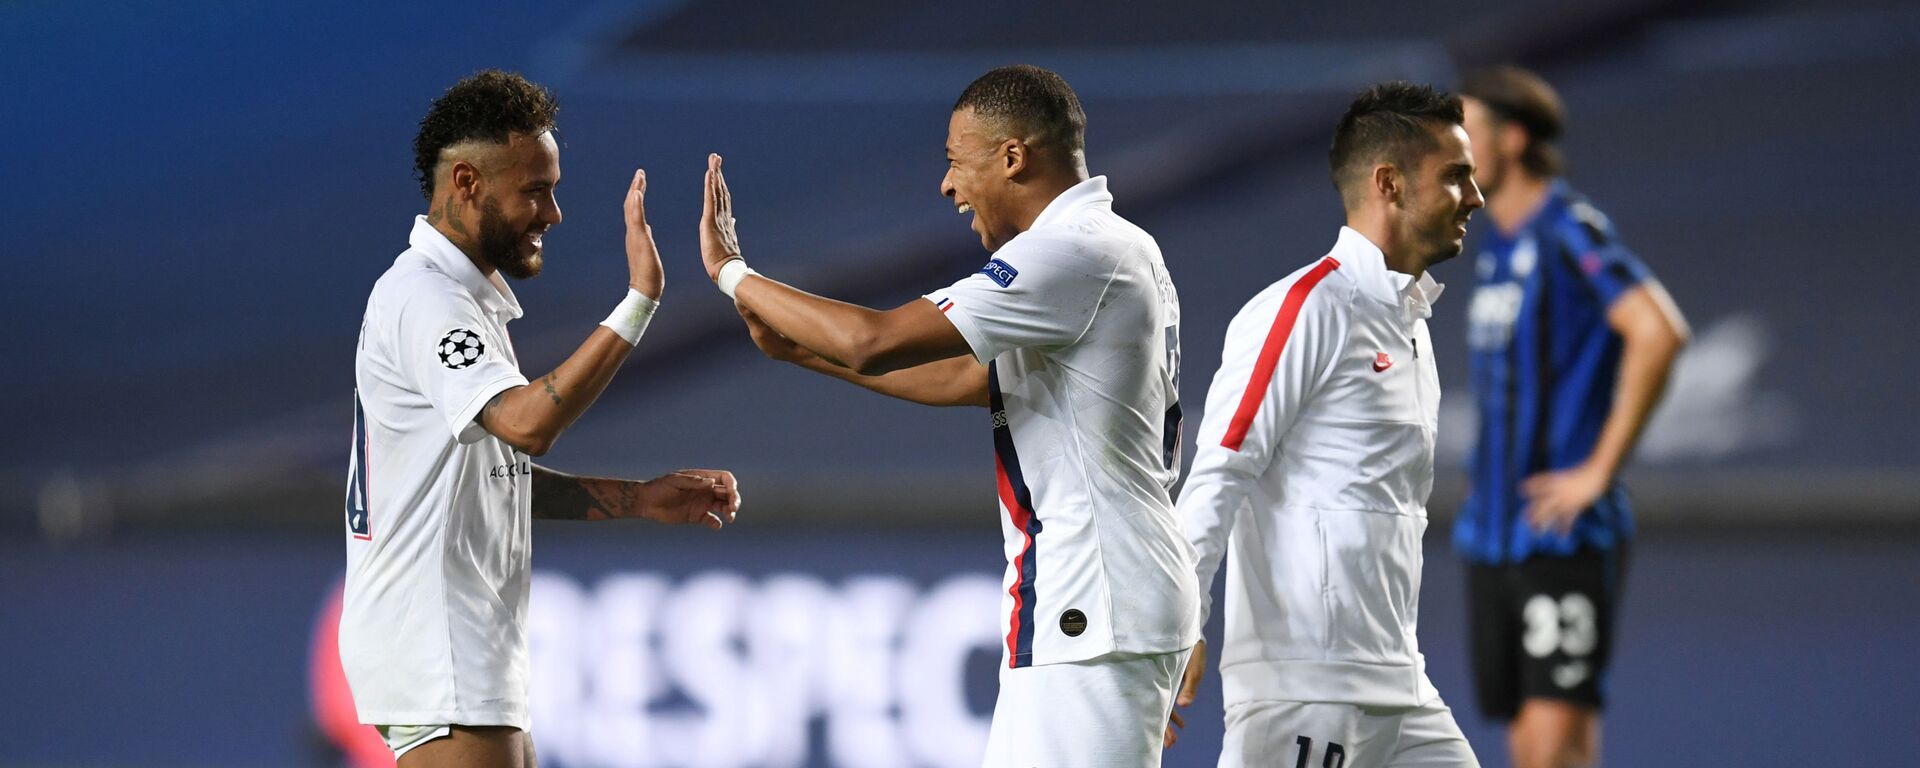 Paris St Germain's Neymar and Kylian Mbappe celebrate after they orchestrated a late comeback to knock out Atalanta. - اسپوتنیک افغانستان  , 1920, 07.06.2021